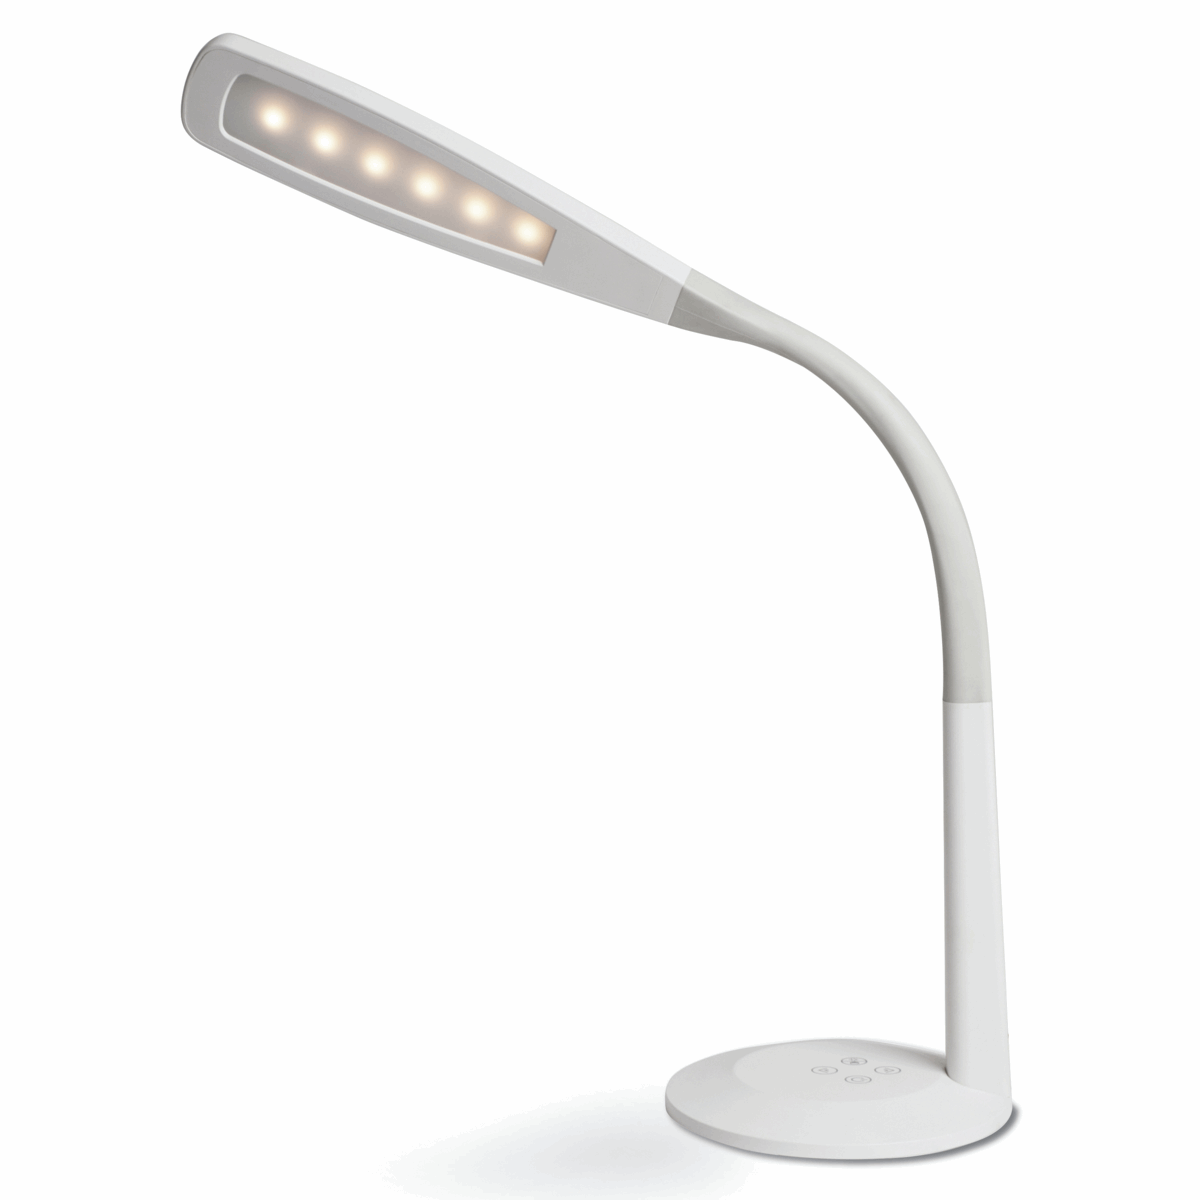 PURElite Touch LED Desk Lamp - 4 colour settings from Warm to Cool